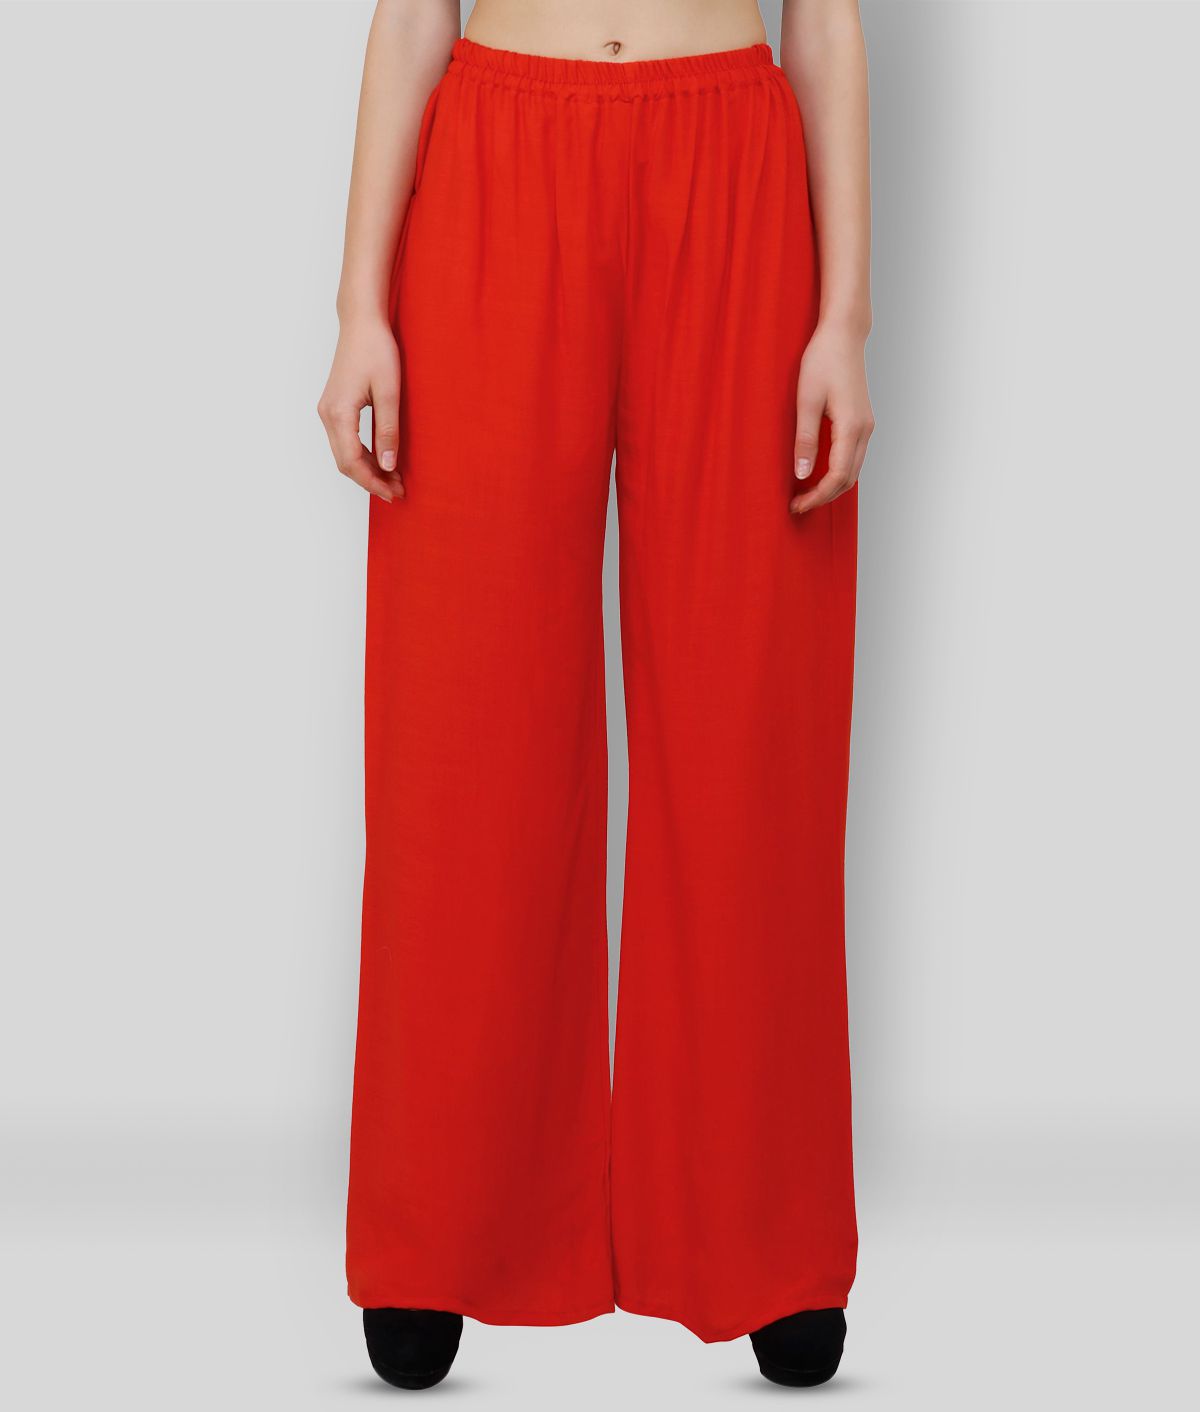     			Aadrika - Red Rayon Wide Leg Women's Palazzos ( Pack of 1 )